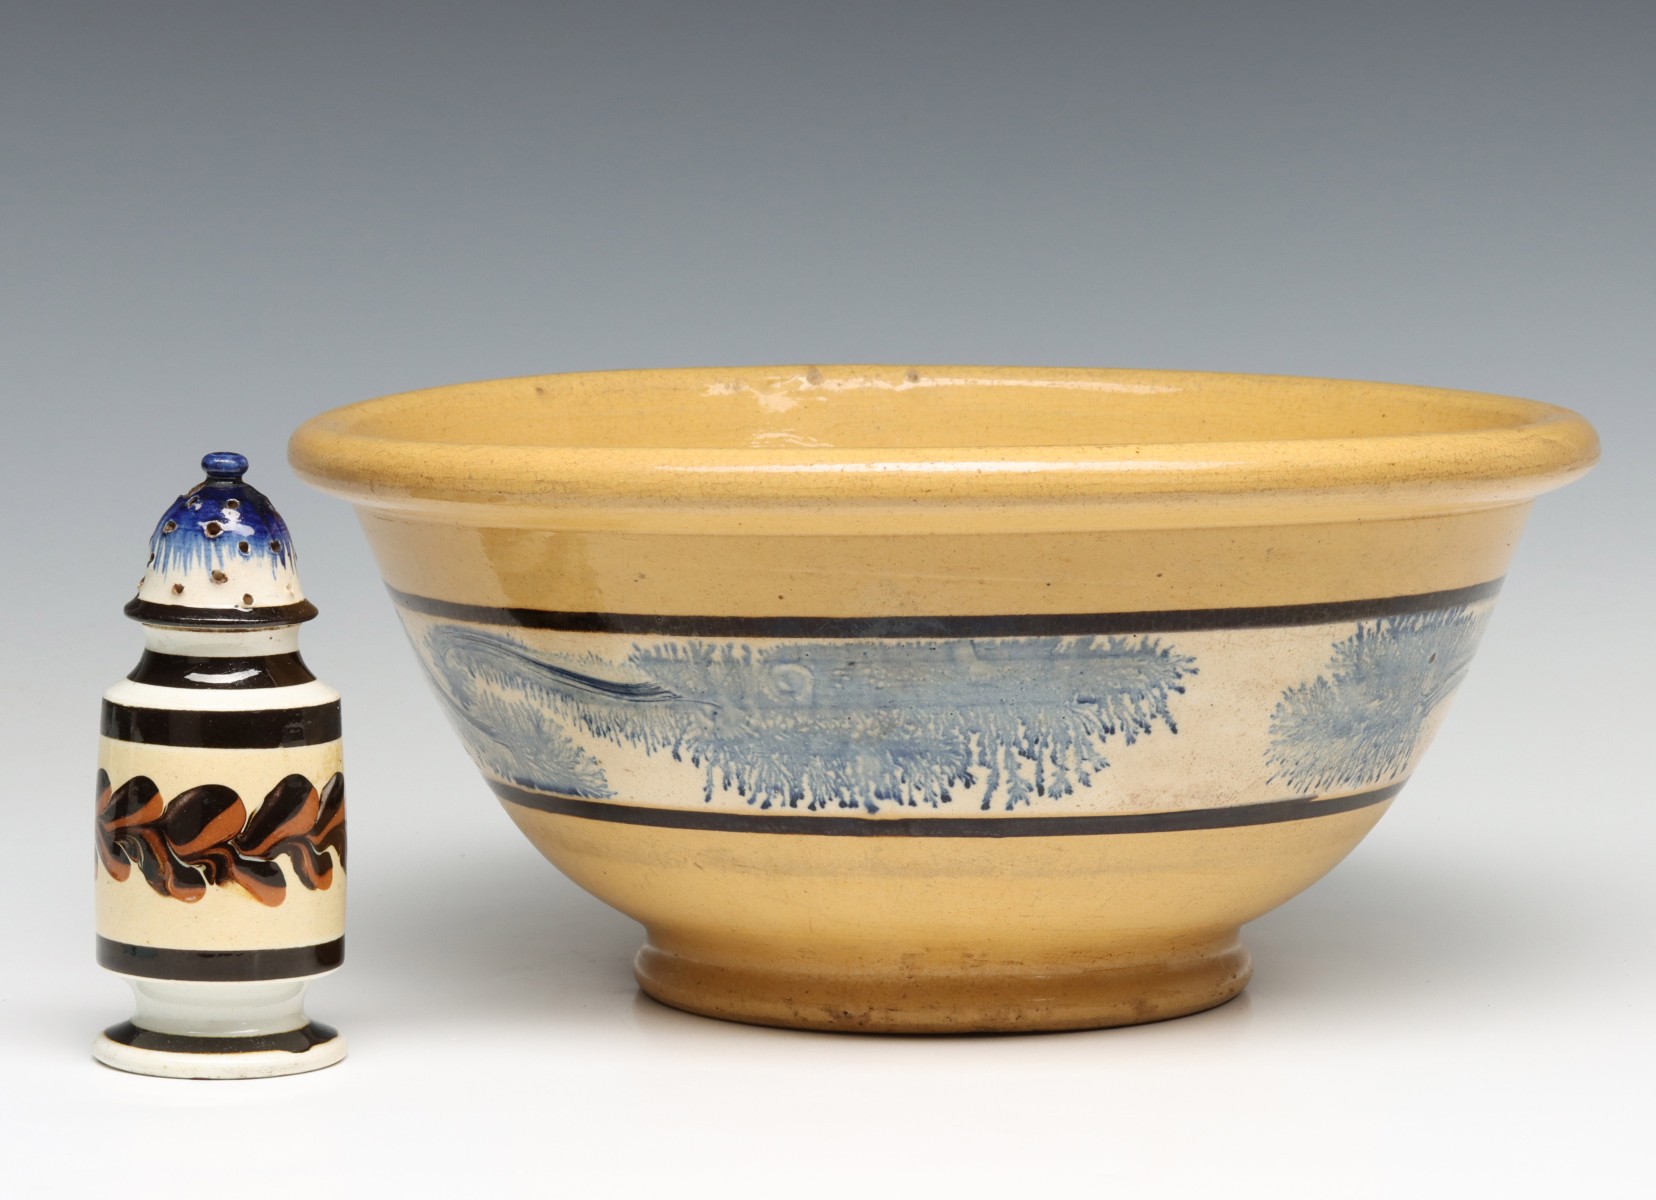 MOCHAWARE PEPPER POT AND YELLOW WARE BOWL WITH SEAWEED